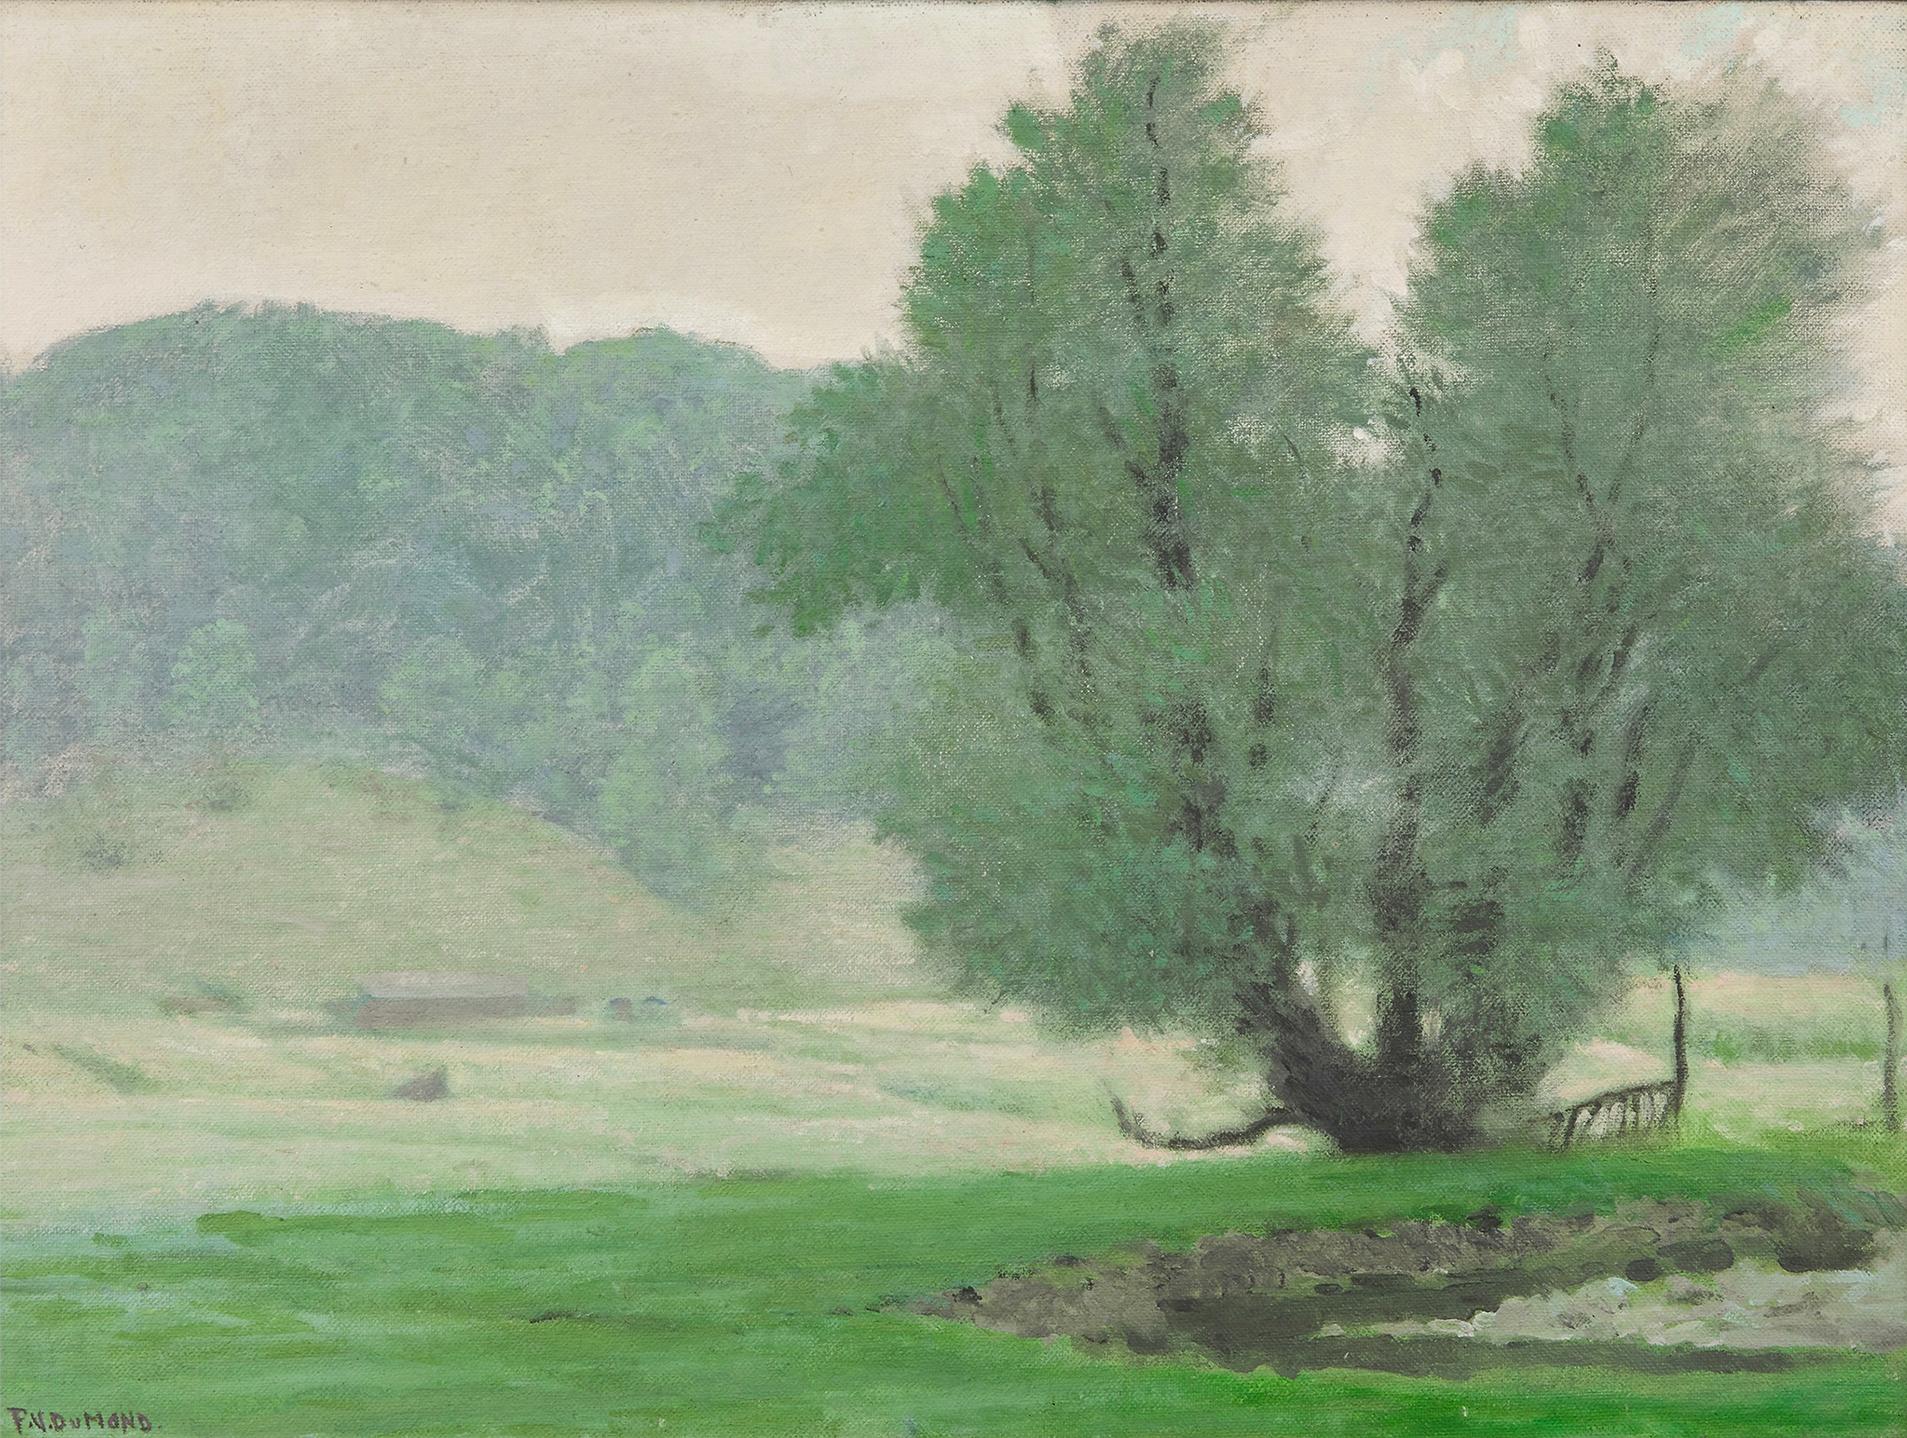 Willows, Old Lyme, CT Summer landscape - Painting by Frank Vincent Dumond